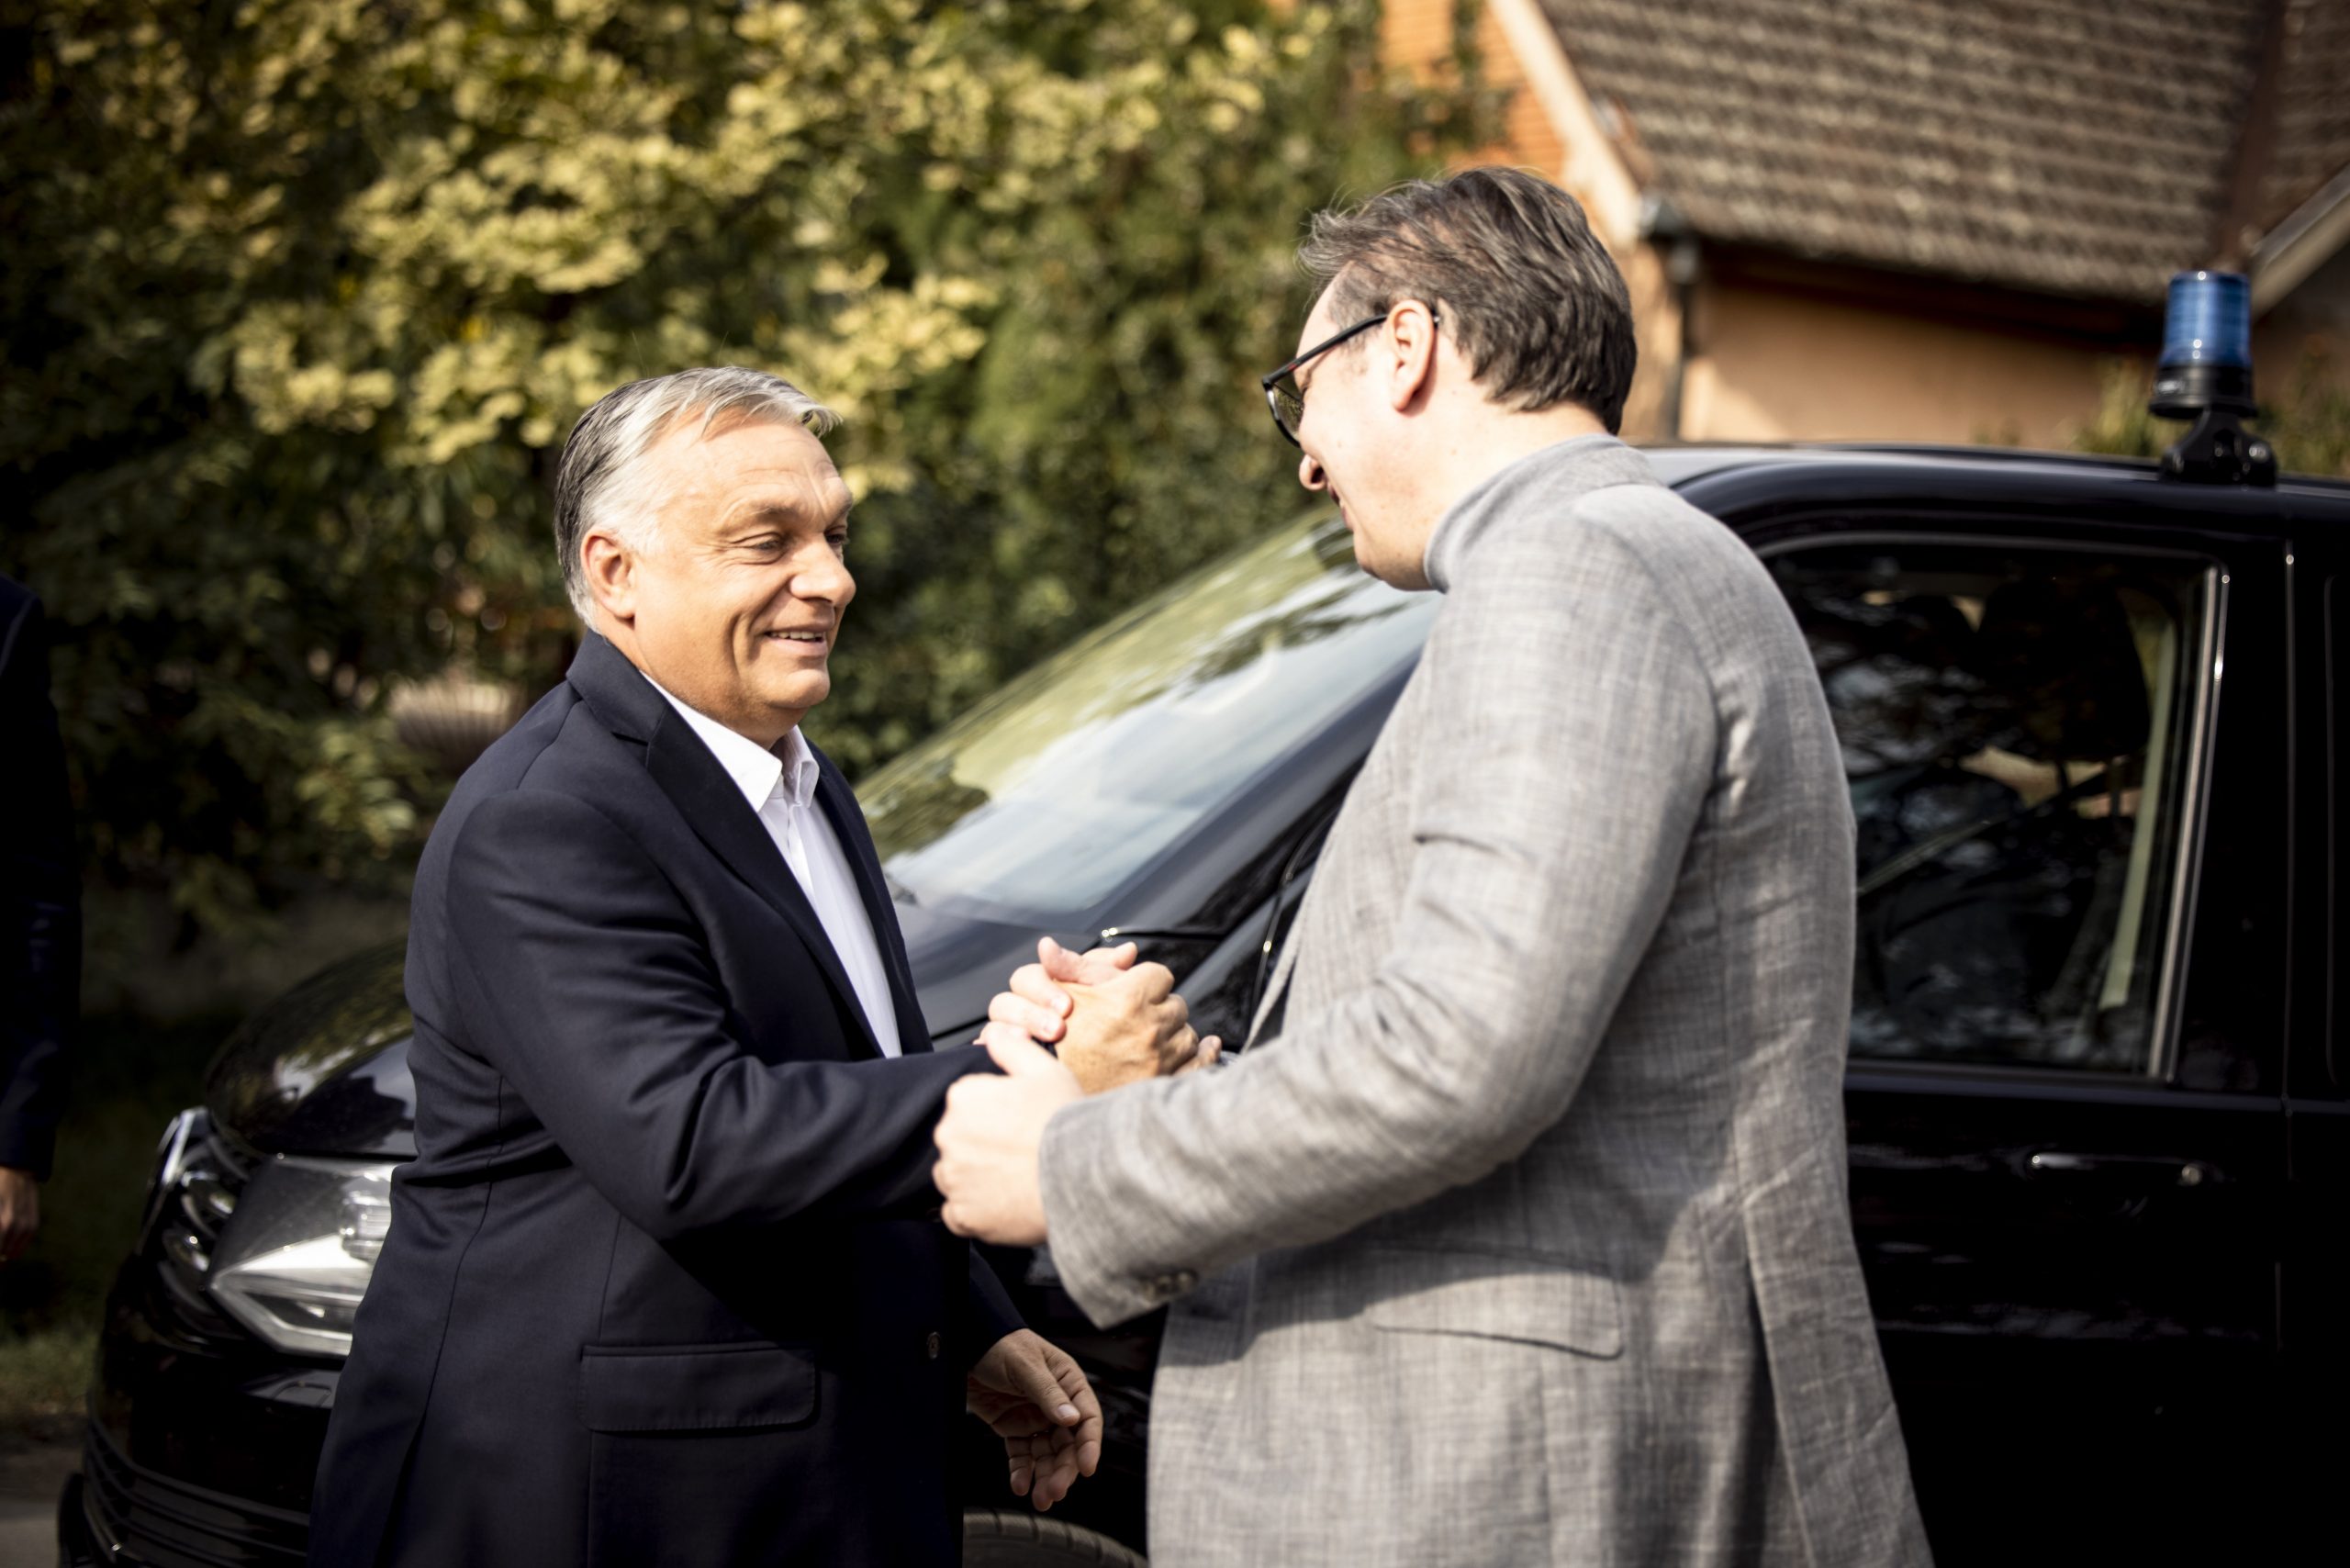 PM Orbán: Hungary and Serbia 'Building Future Together'